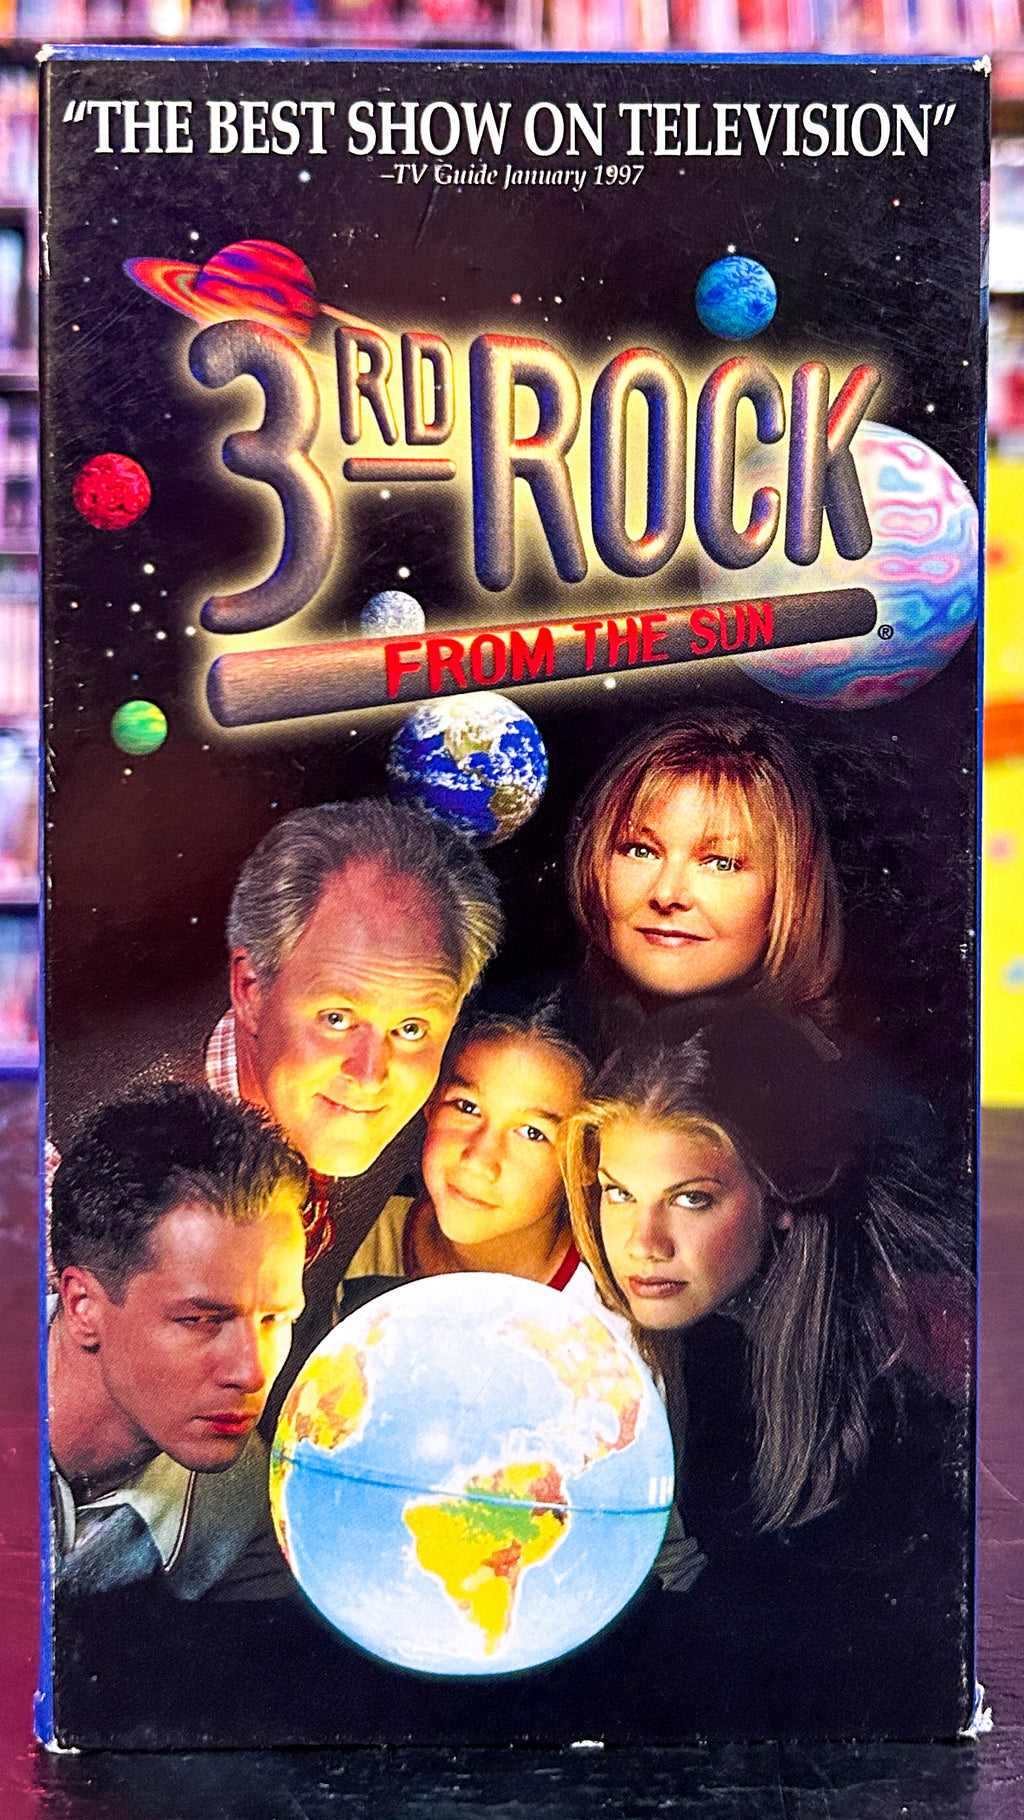 3rd Rock From The Sun (Promo)